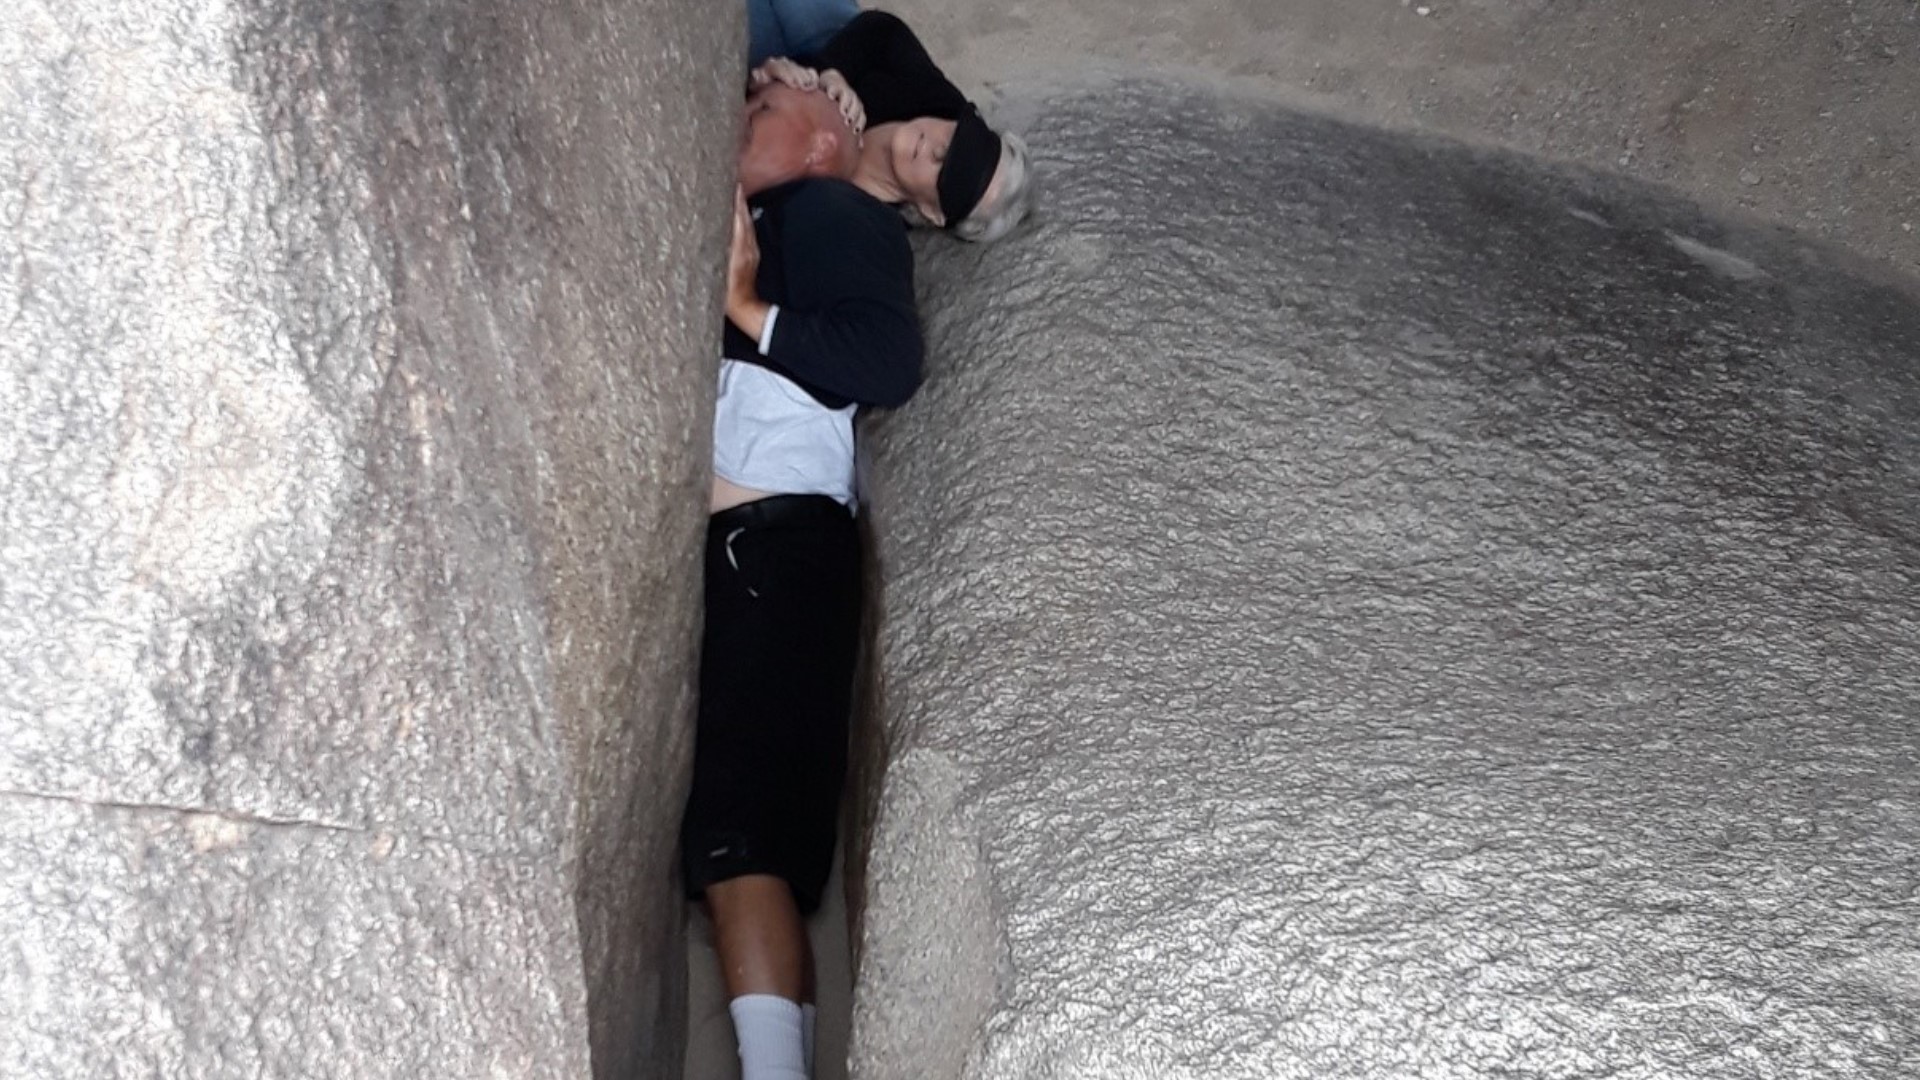 A 50-year-old man was stuck in a small crevice between two massive boulders for close to an hour on Thanksgiving.